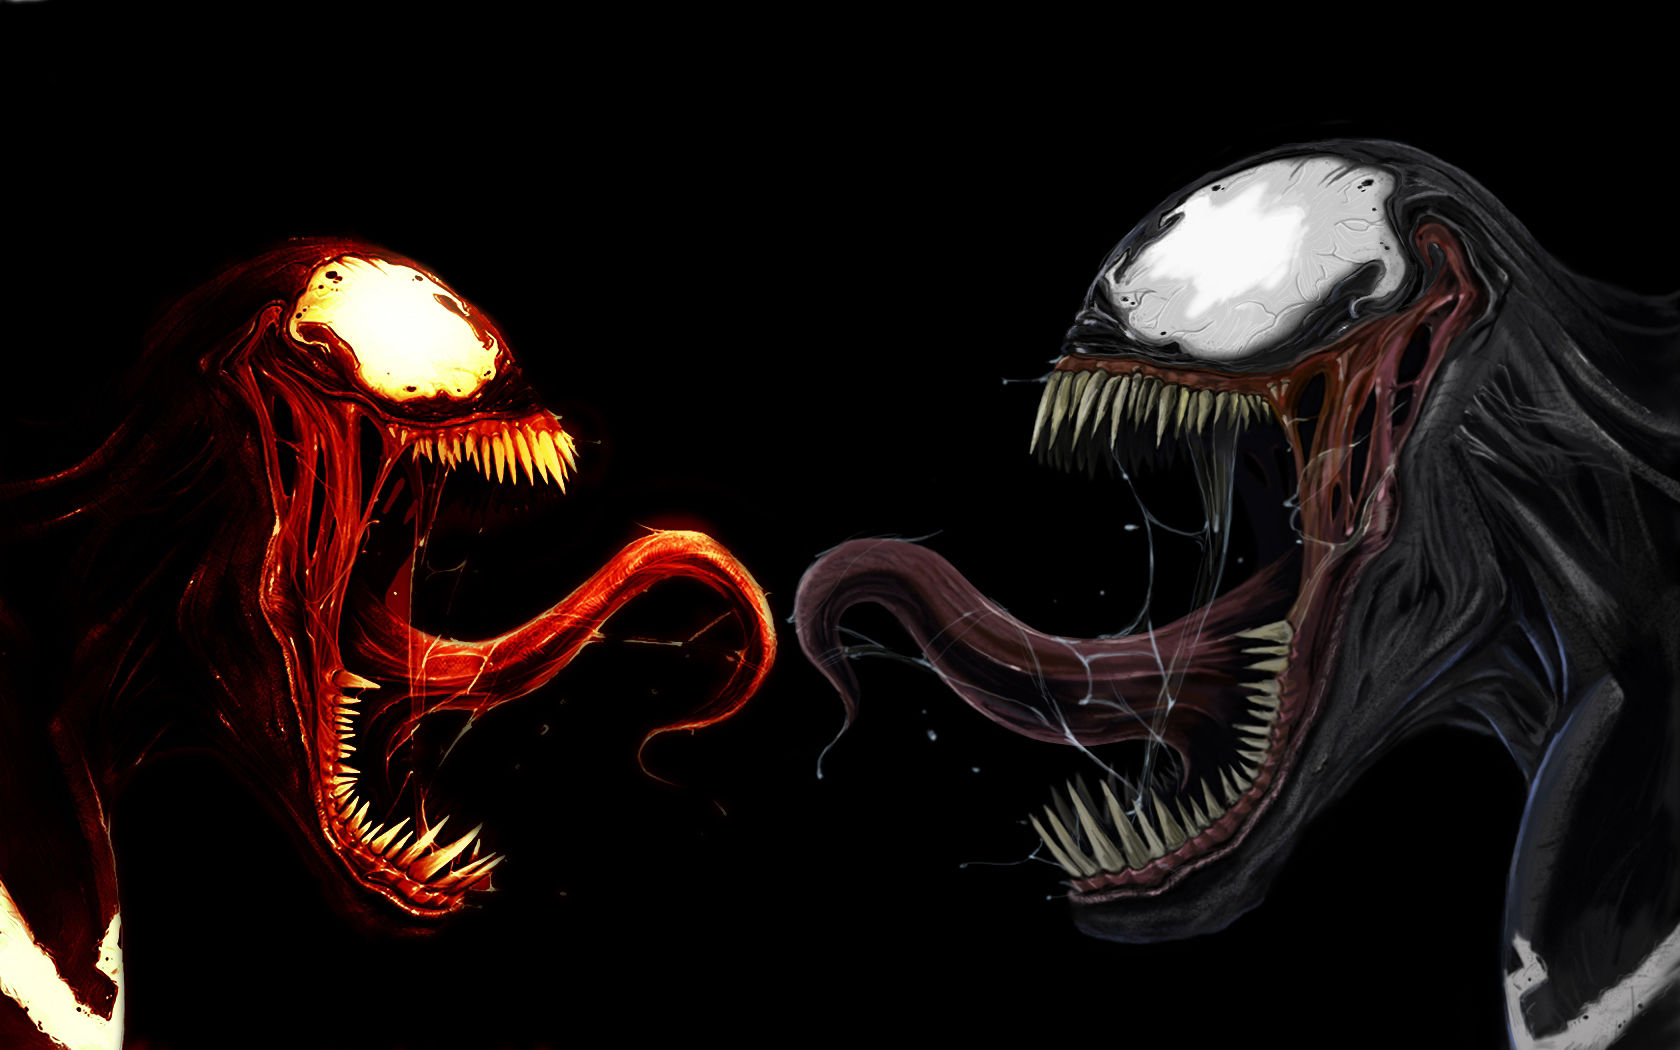 Spider-Man 4 Lizard And Carnage - wallpaper.